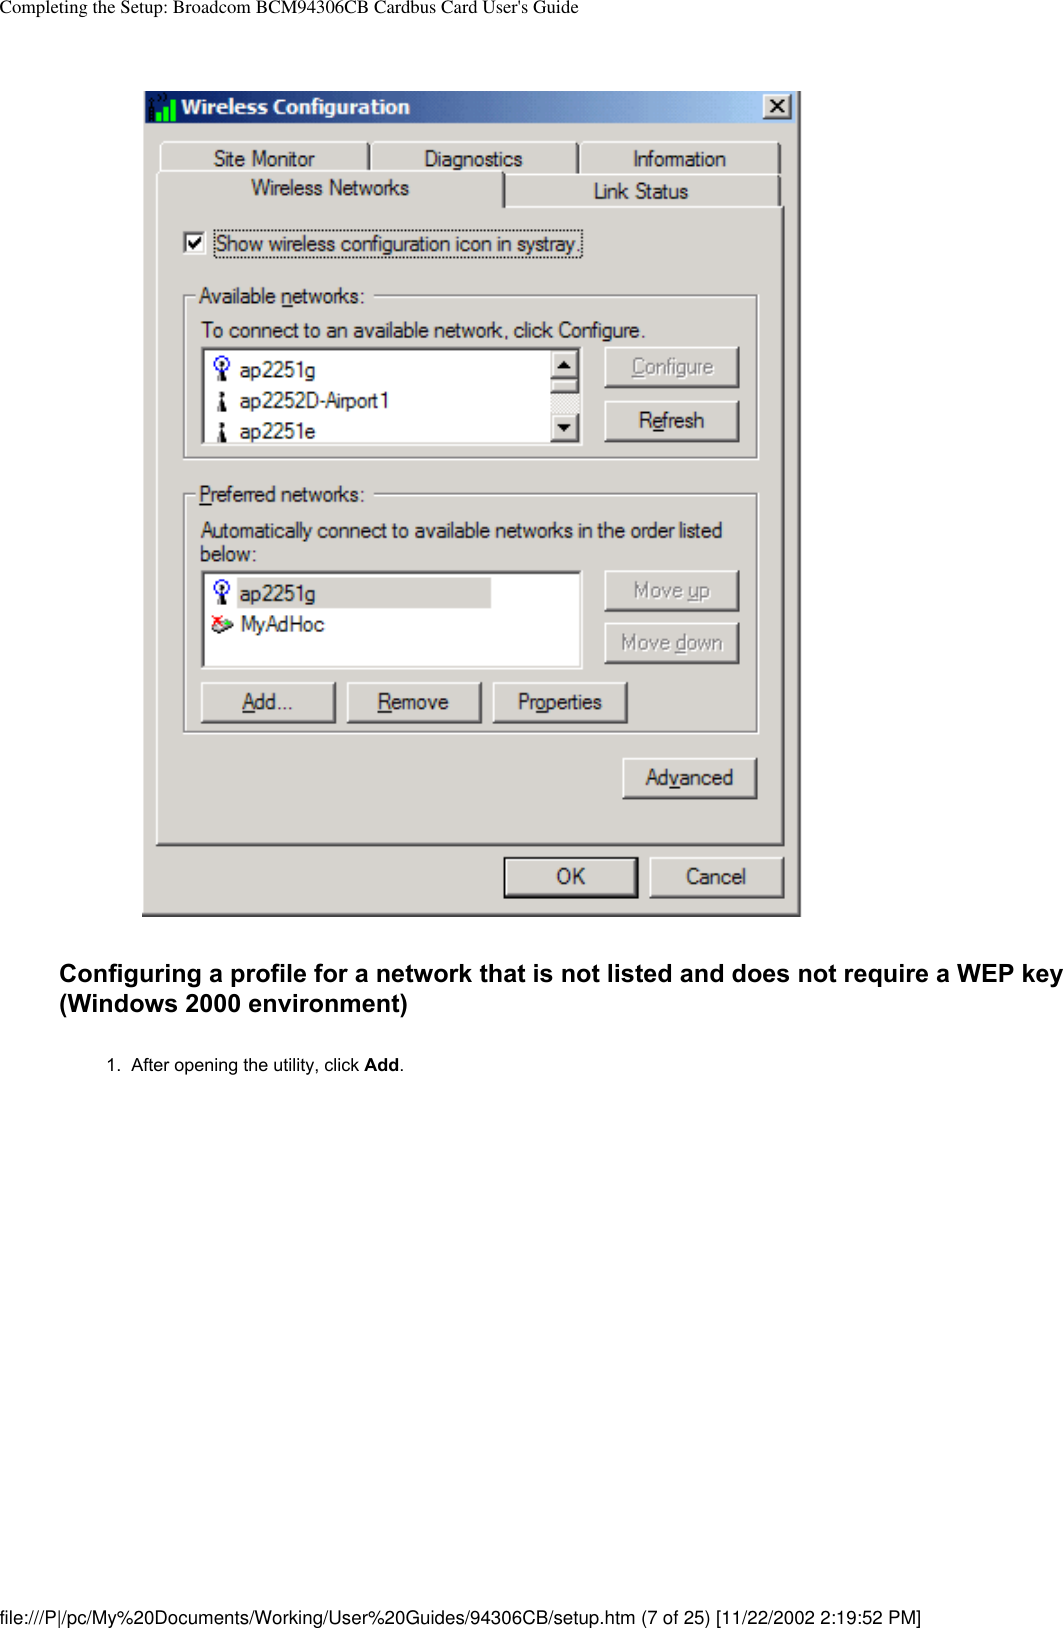 Completing the Setup: Broadcom BCM94306CB Cardbus Card User&apos;s GuideConfiguring a profile for a network that is not listed and does not require a WEP key (Windows 2000 environment)1.  After opening the utility, click Add. file:///P|/pc/My%20Documents/Working/User%20Guides/94306CB/setup.htm (7 of 25) [11/22/2002 2:19:52 PM]